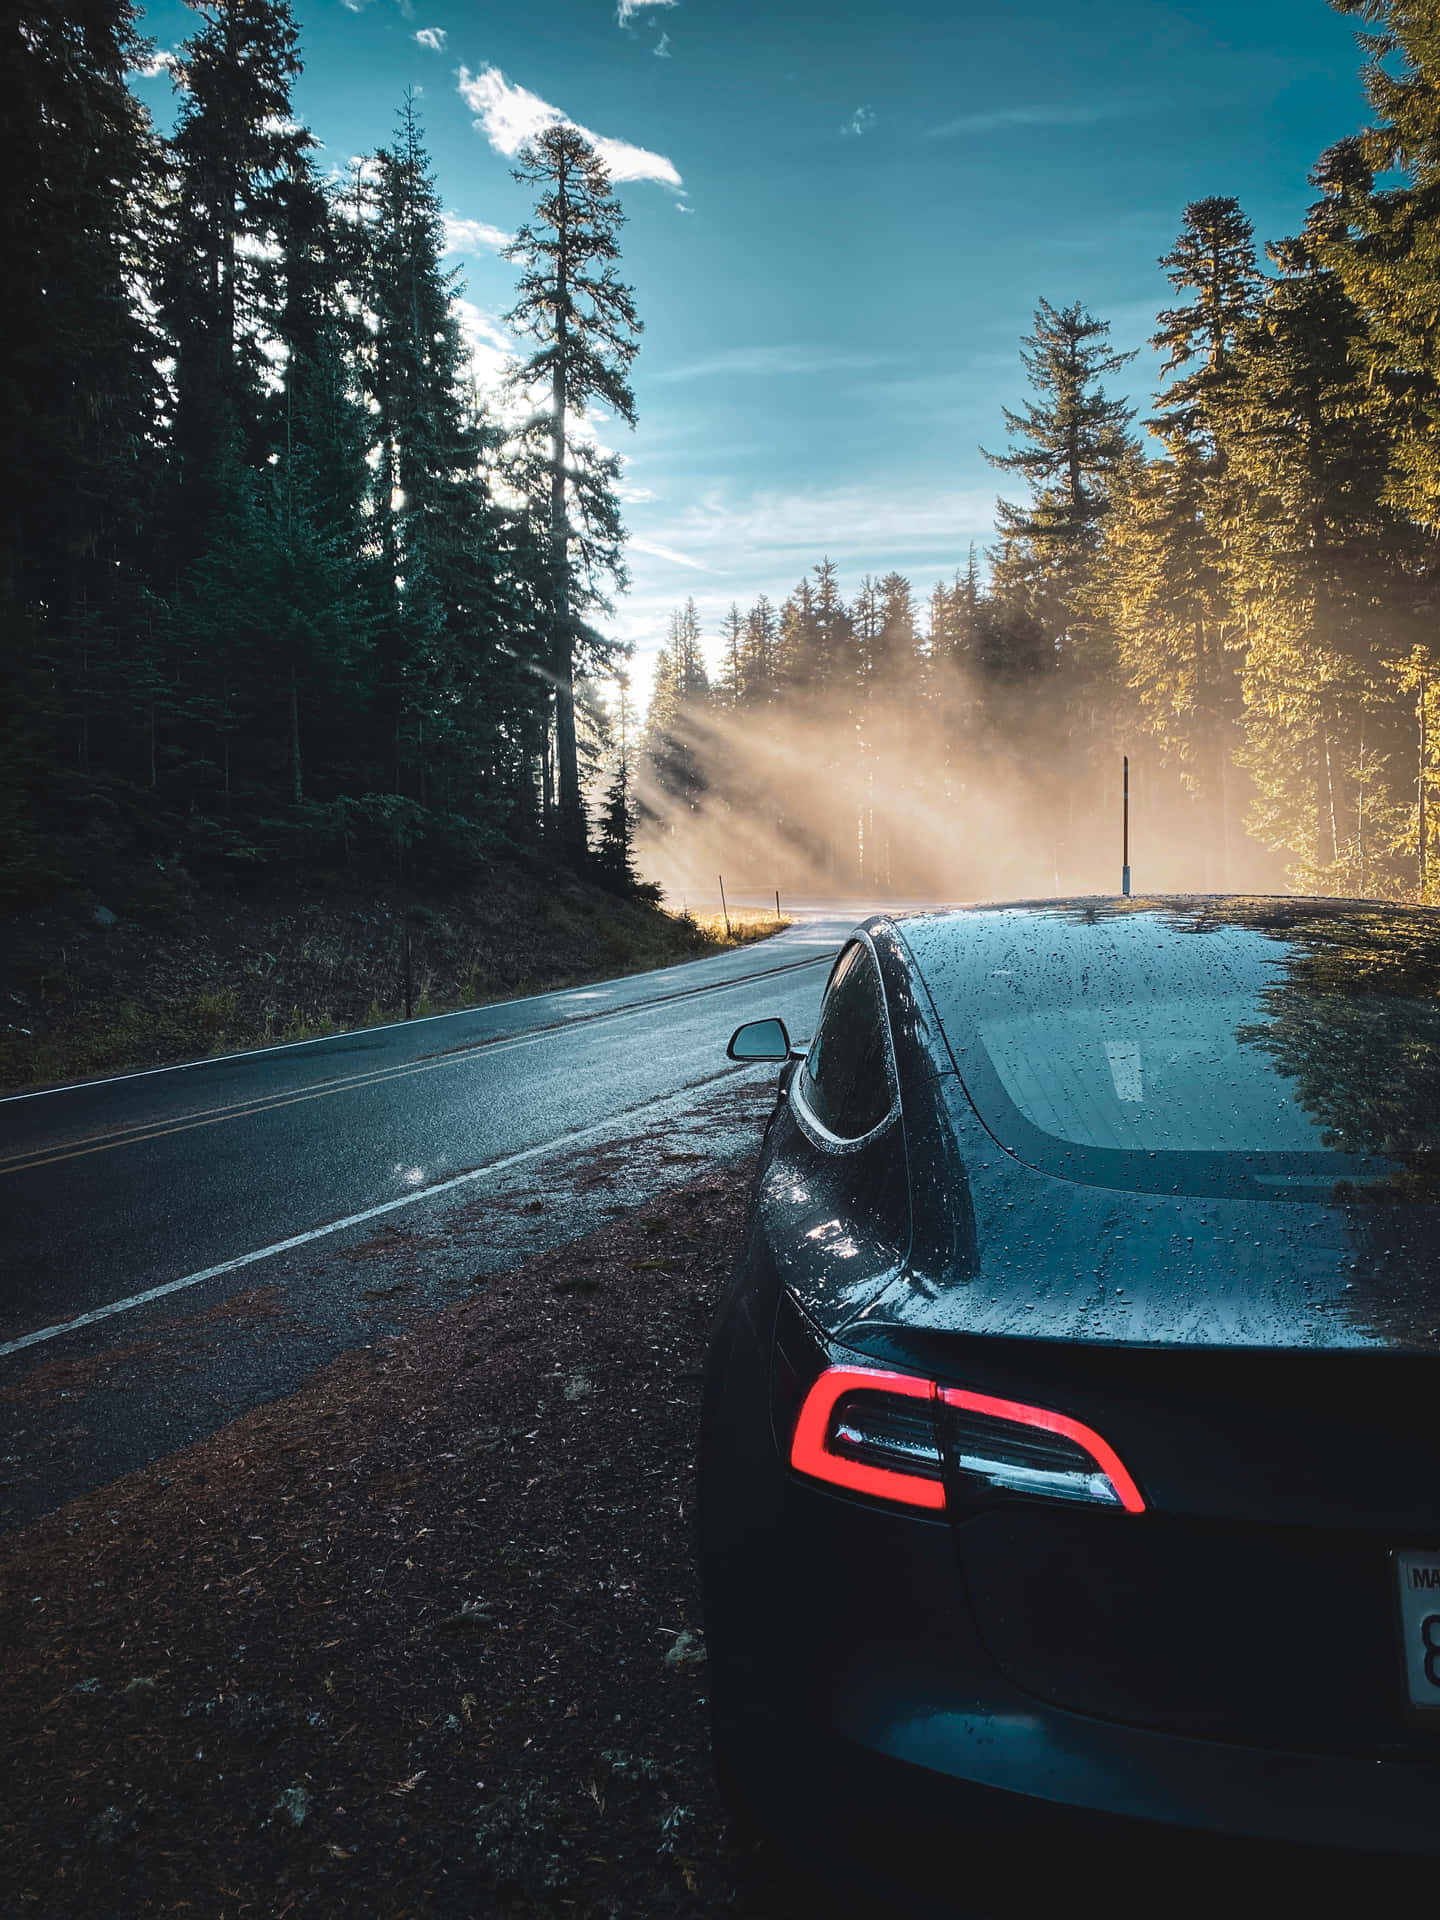 The Iconic Tesla on the Road